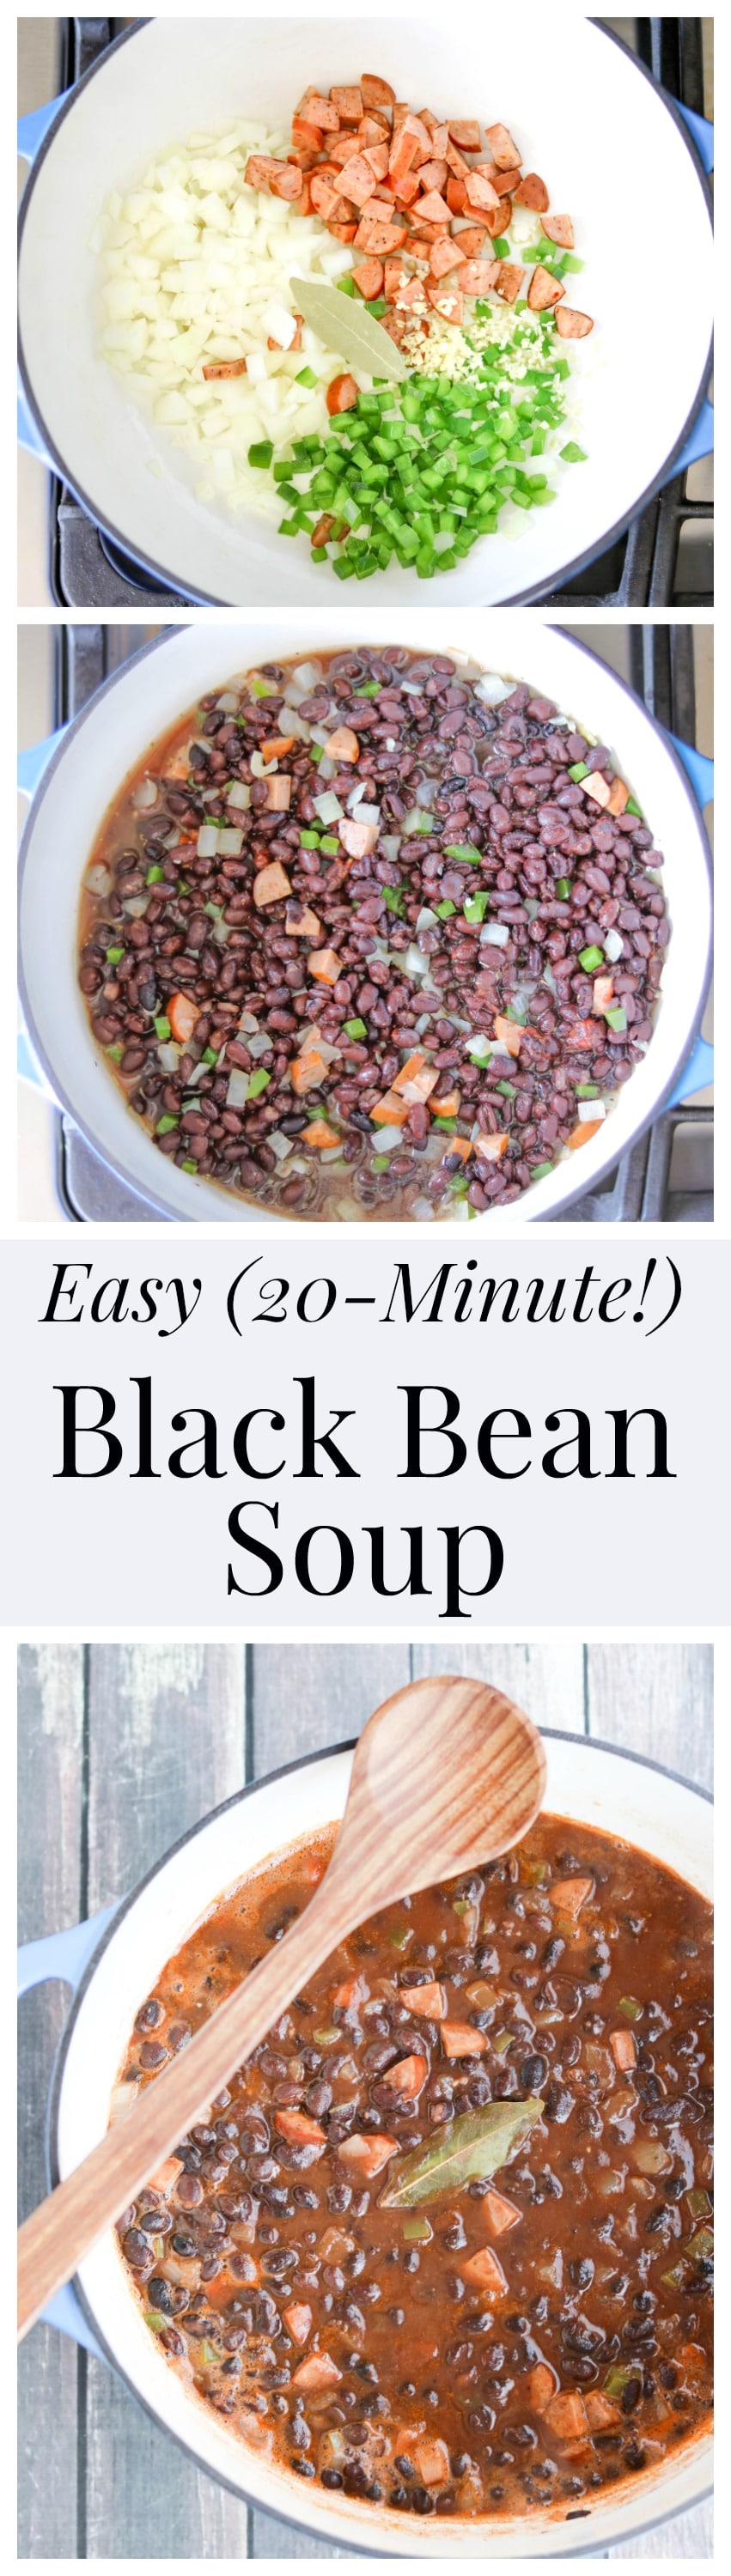 This Easy Black Bean Soup is rich, hearty and filling - and cooks in just 20 minutes! Bonus: we've got directions for crispy-crunchy Cumin-Dusted Bread Bowls that are perfect for serving this delicious soup! AD | www.TwoHealthyKitchens.com